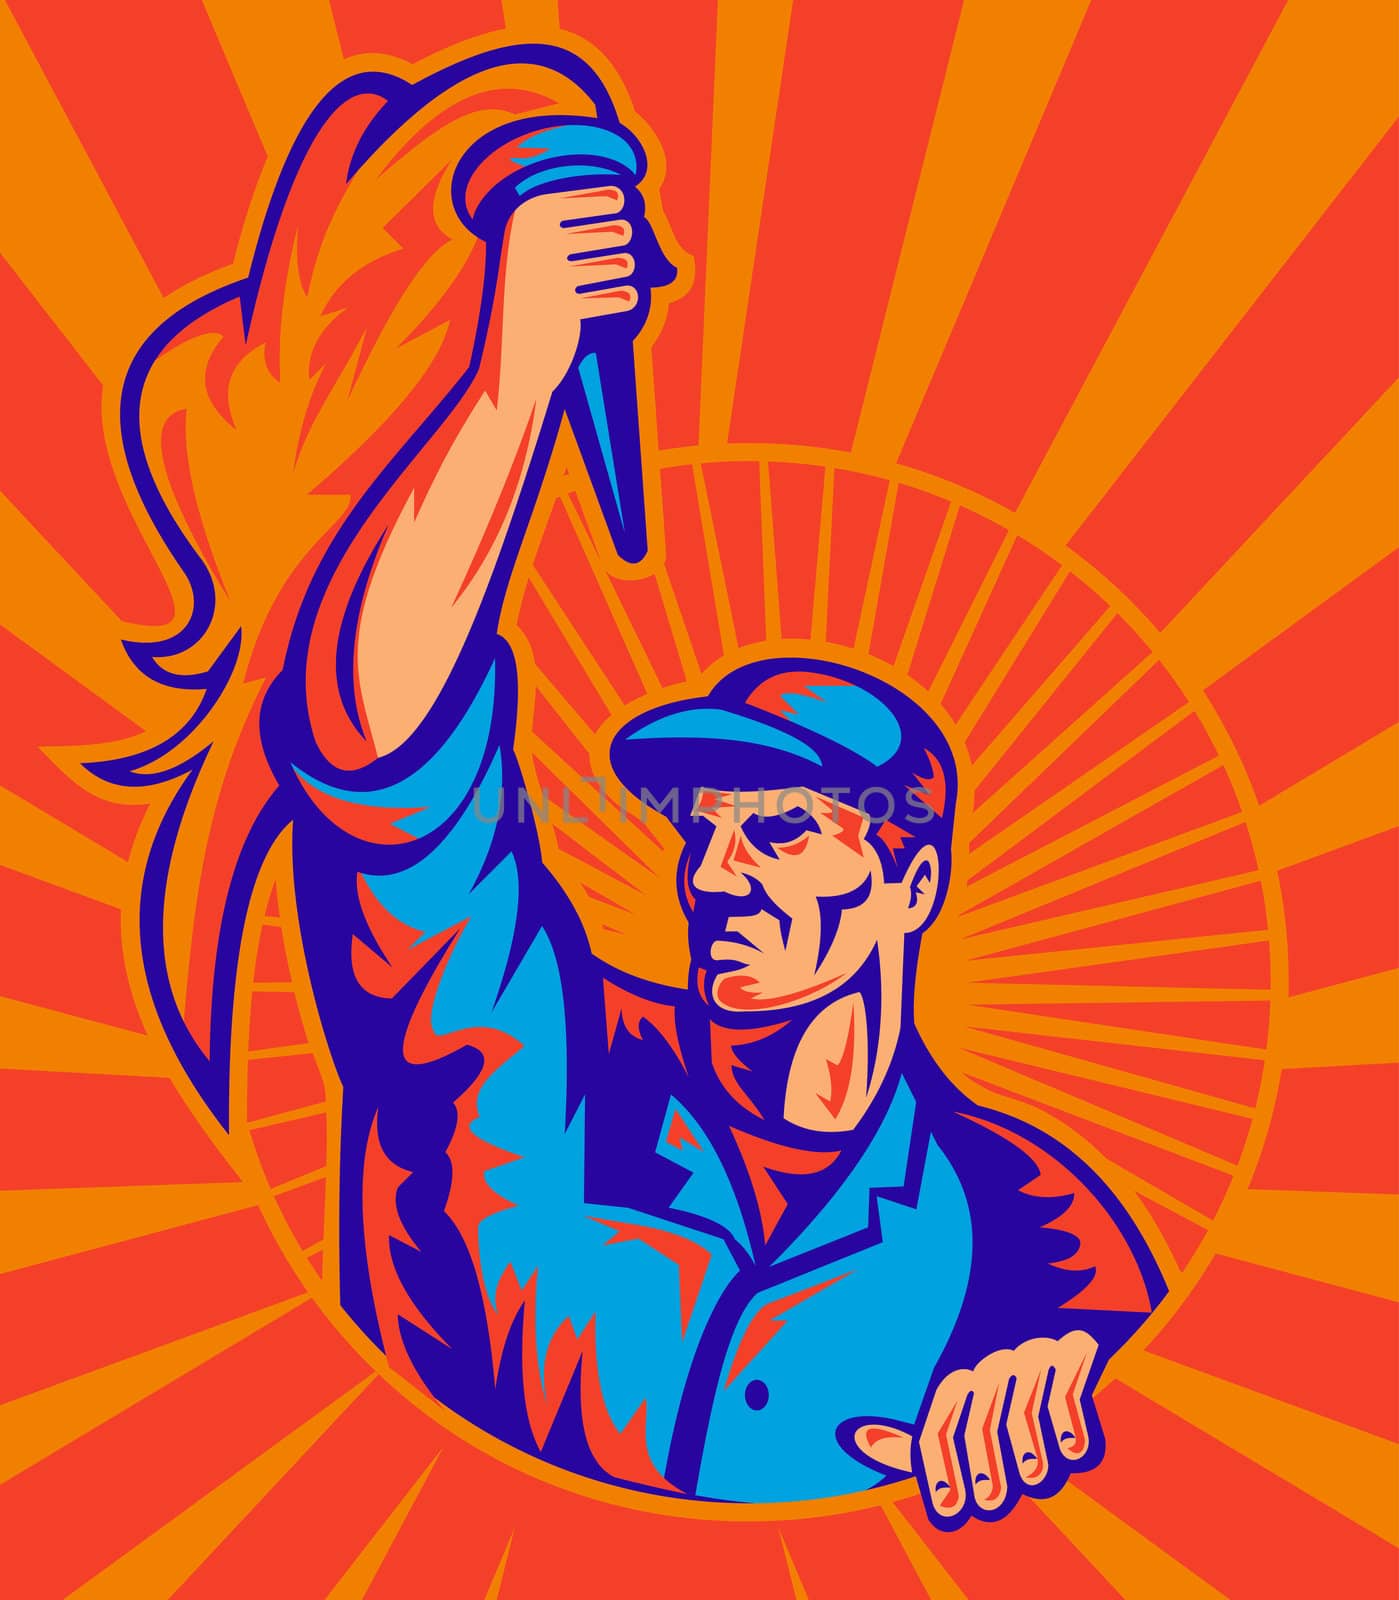 illustration of a male worker carrying flaming torch with sunburst in background done in retro style